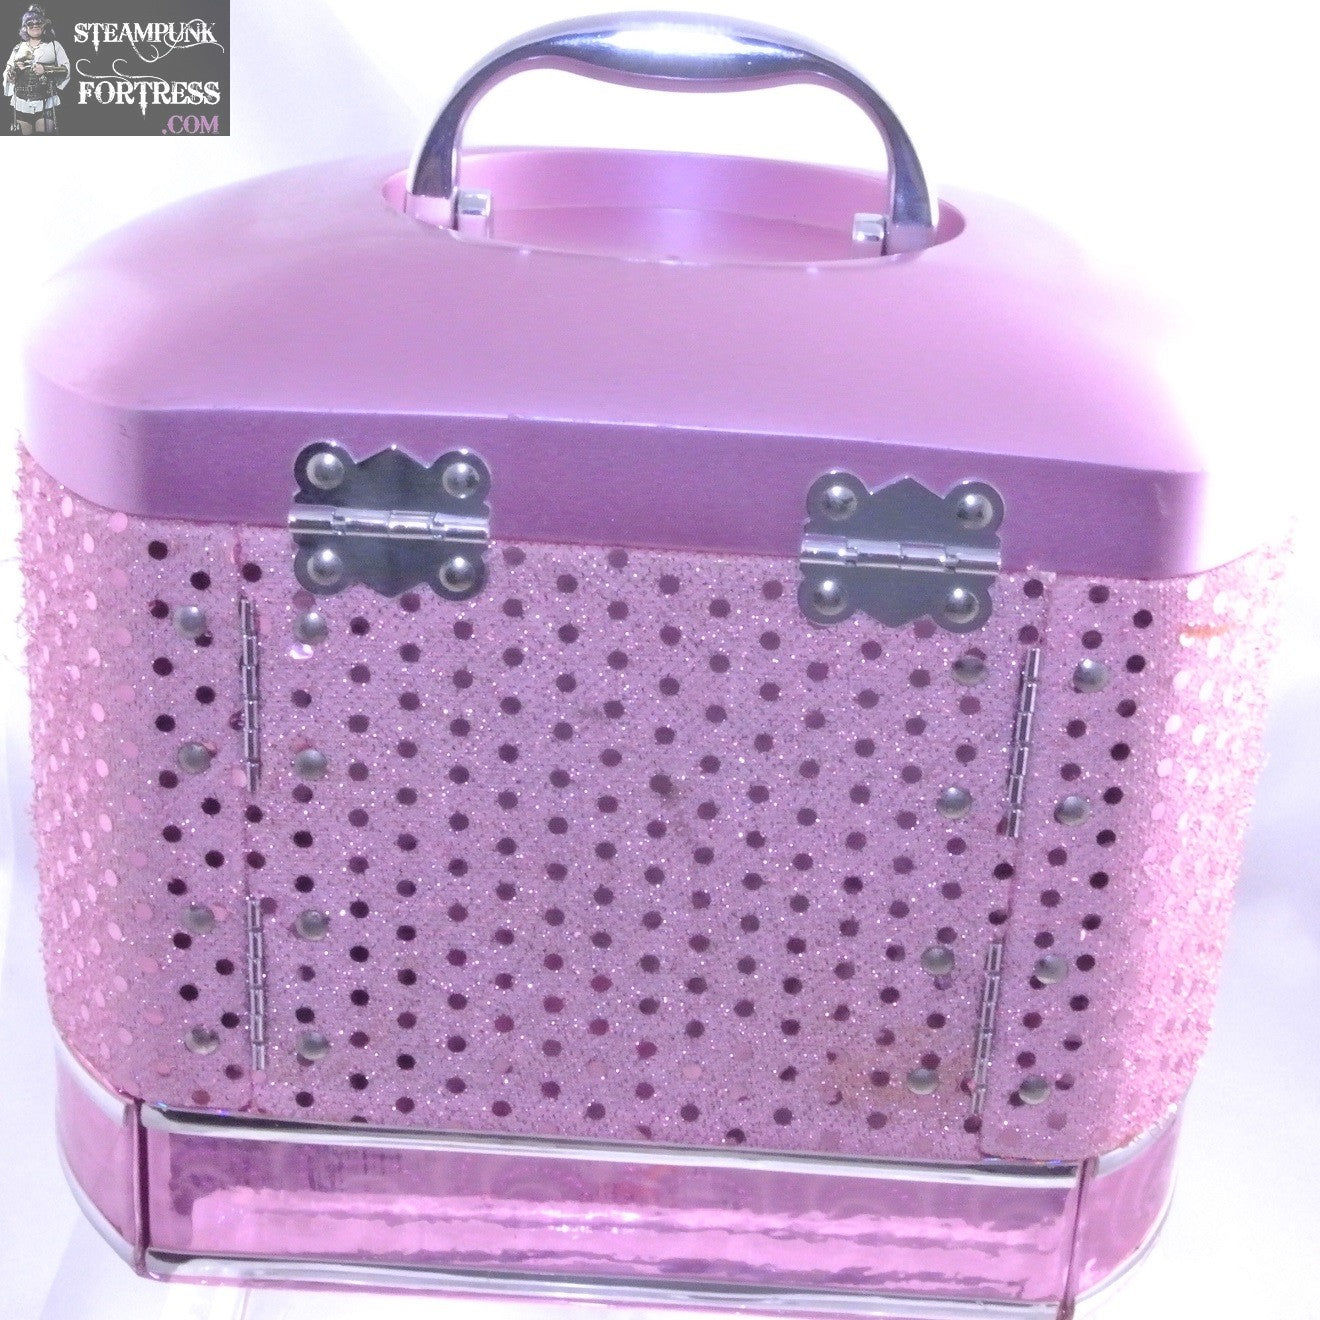 PINK BARBIE ACRYLIC DISPLAY CARRYING CASE BOX MAKEUP OPENS UP CRAFTS DESTACH ETC